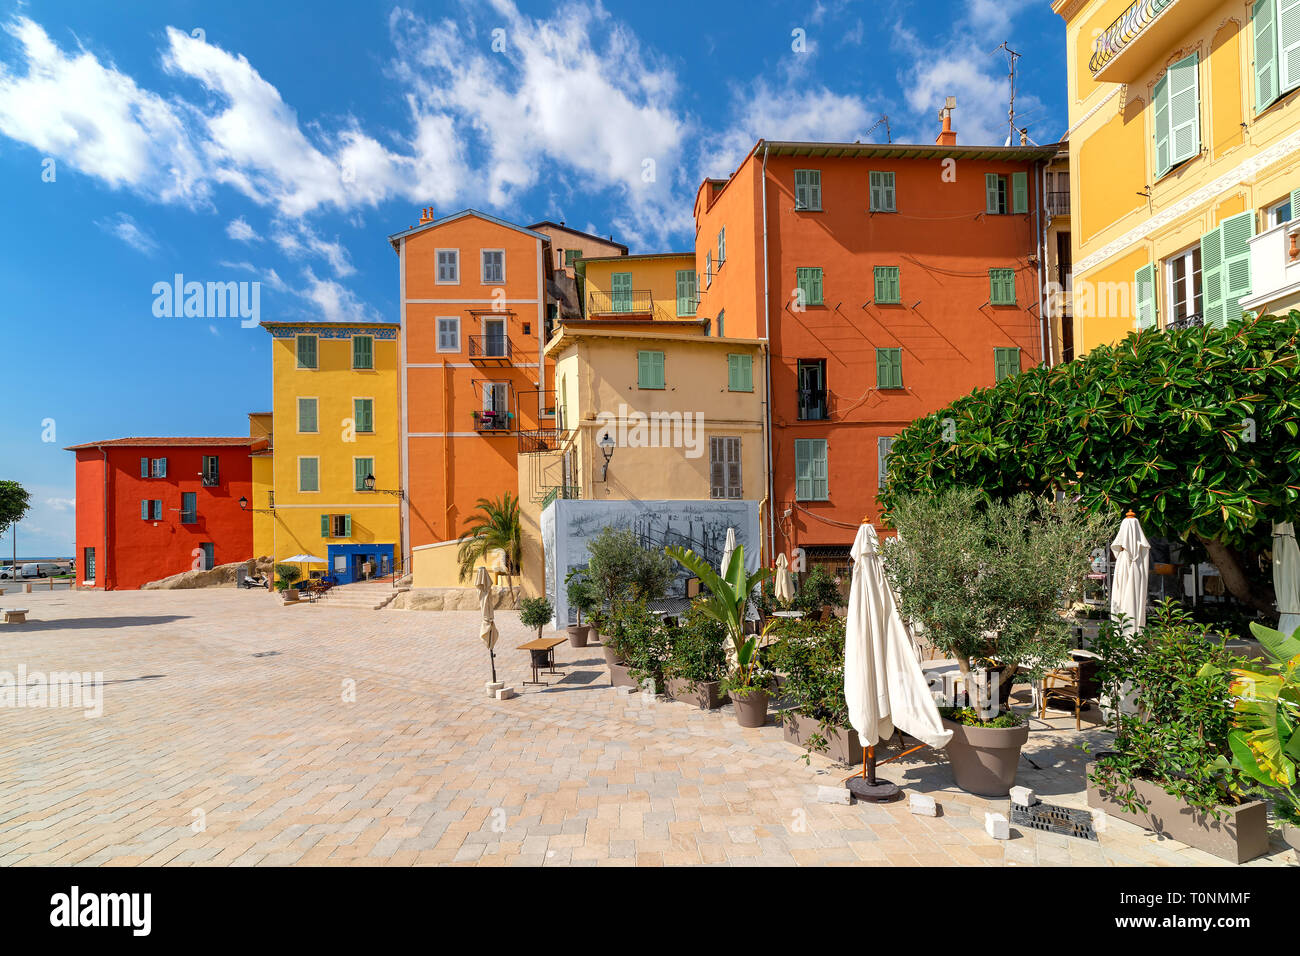 Town square and colorful houses in Menton, France. Stock Photo